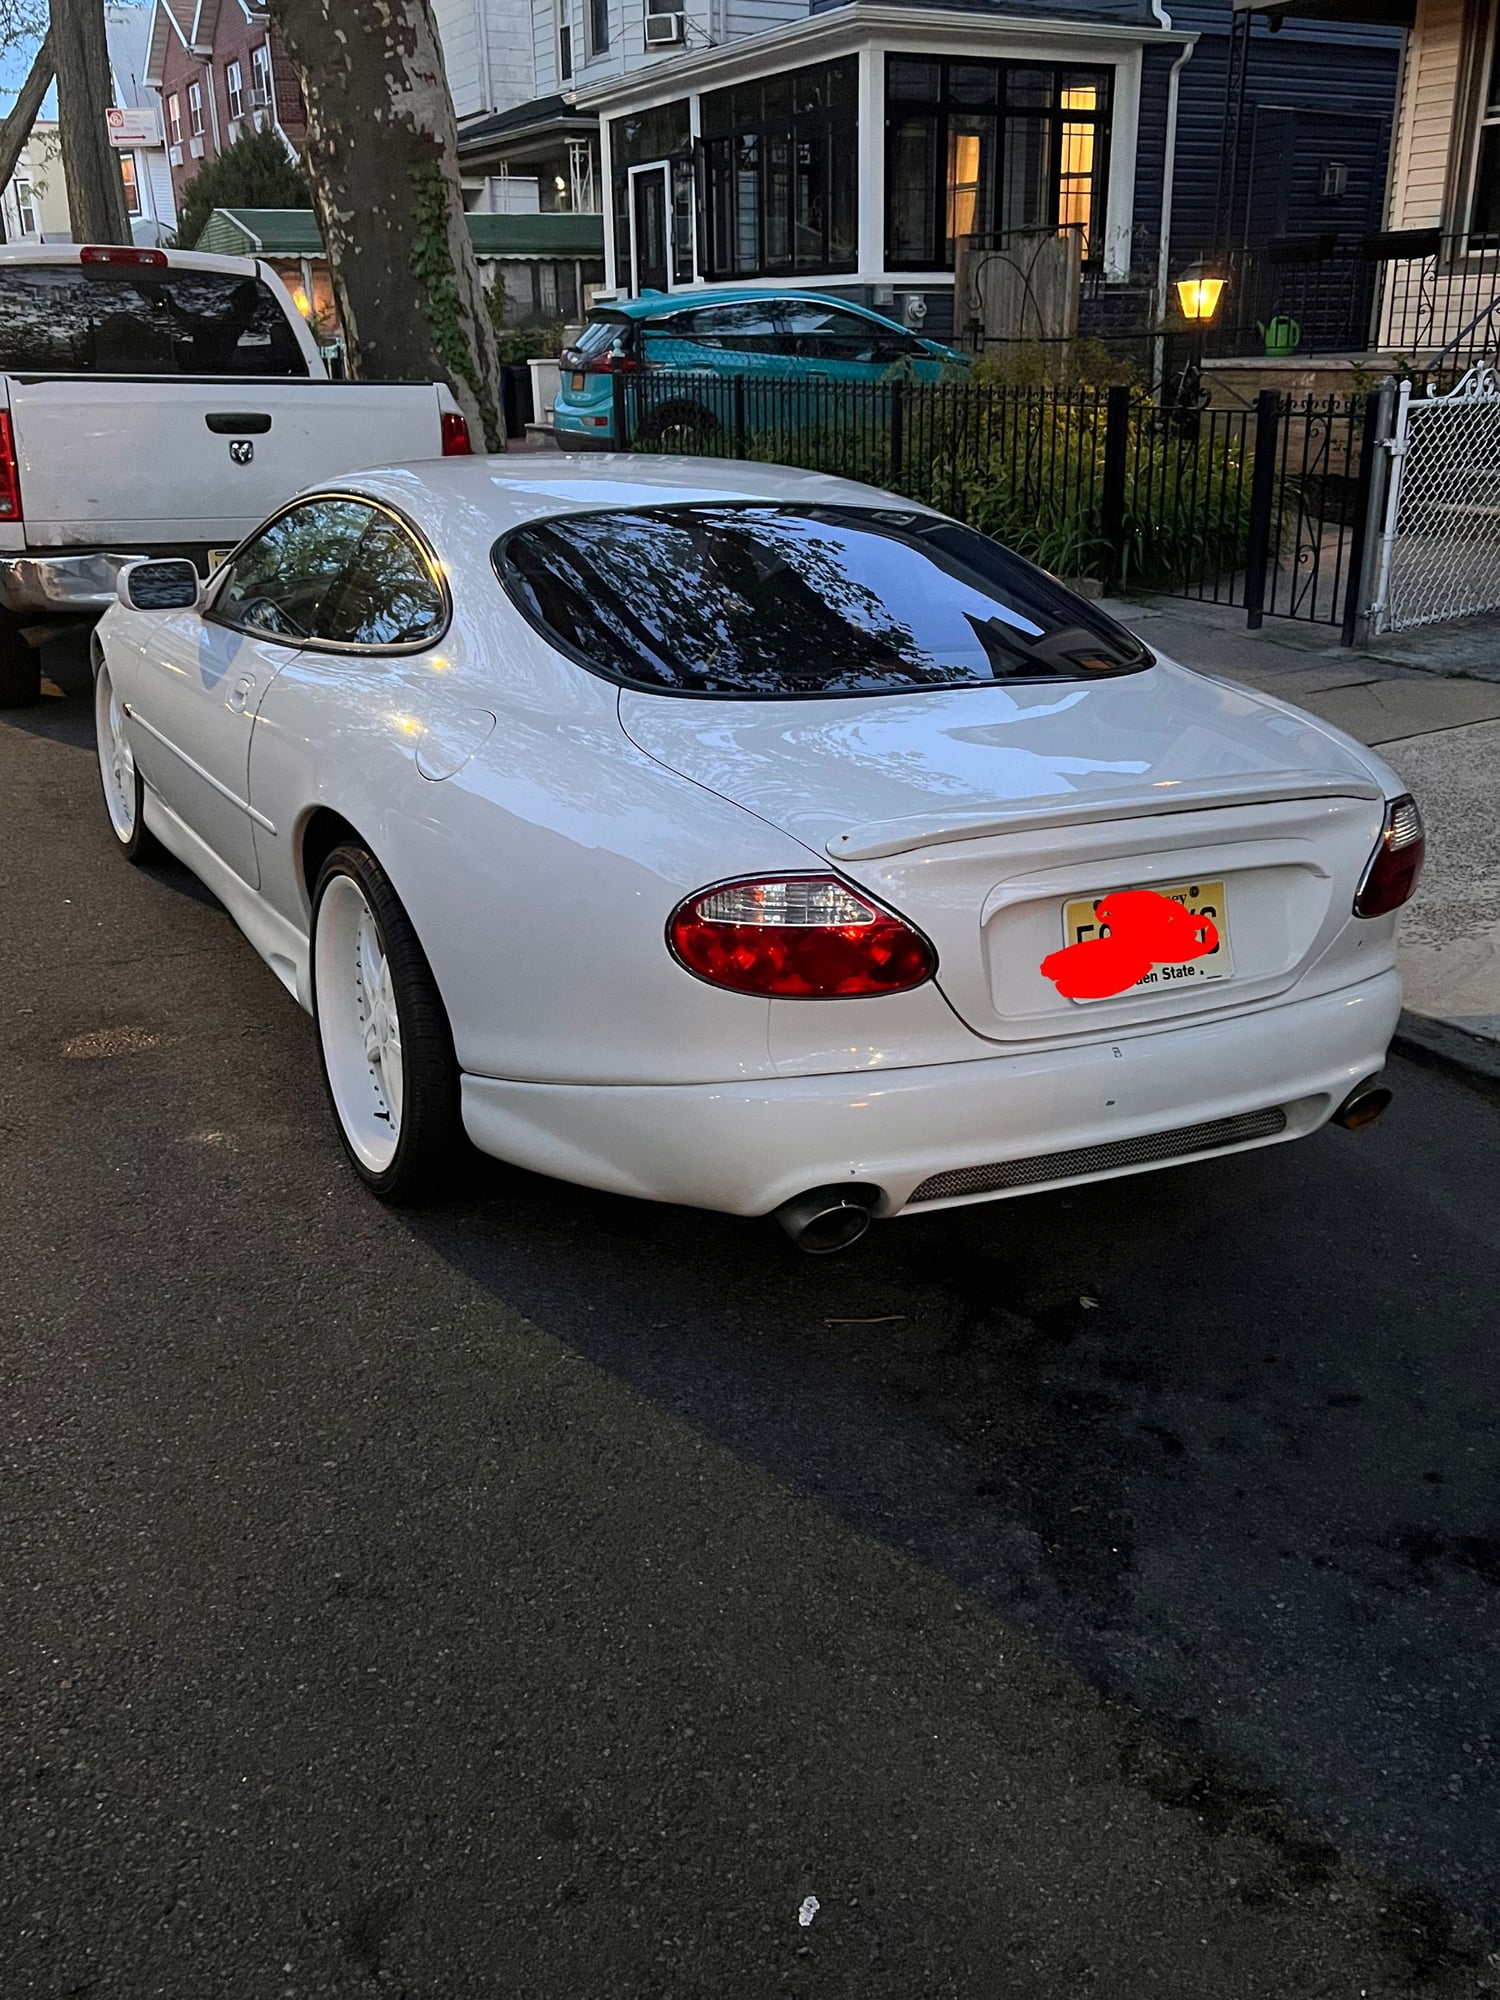 1997 Jaguar XK8 - Rare hardtop....niceee custum 97 xk8 great looker wont last long..lots of extras.. - Used - VIN SAJGX5749VC006144 - 137,503 Miles - 8 cyl - 2WD - Automatic - Coupe - White - Brooklyn, NY 11225, United States